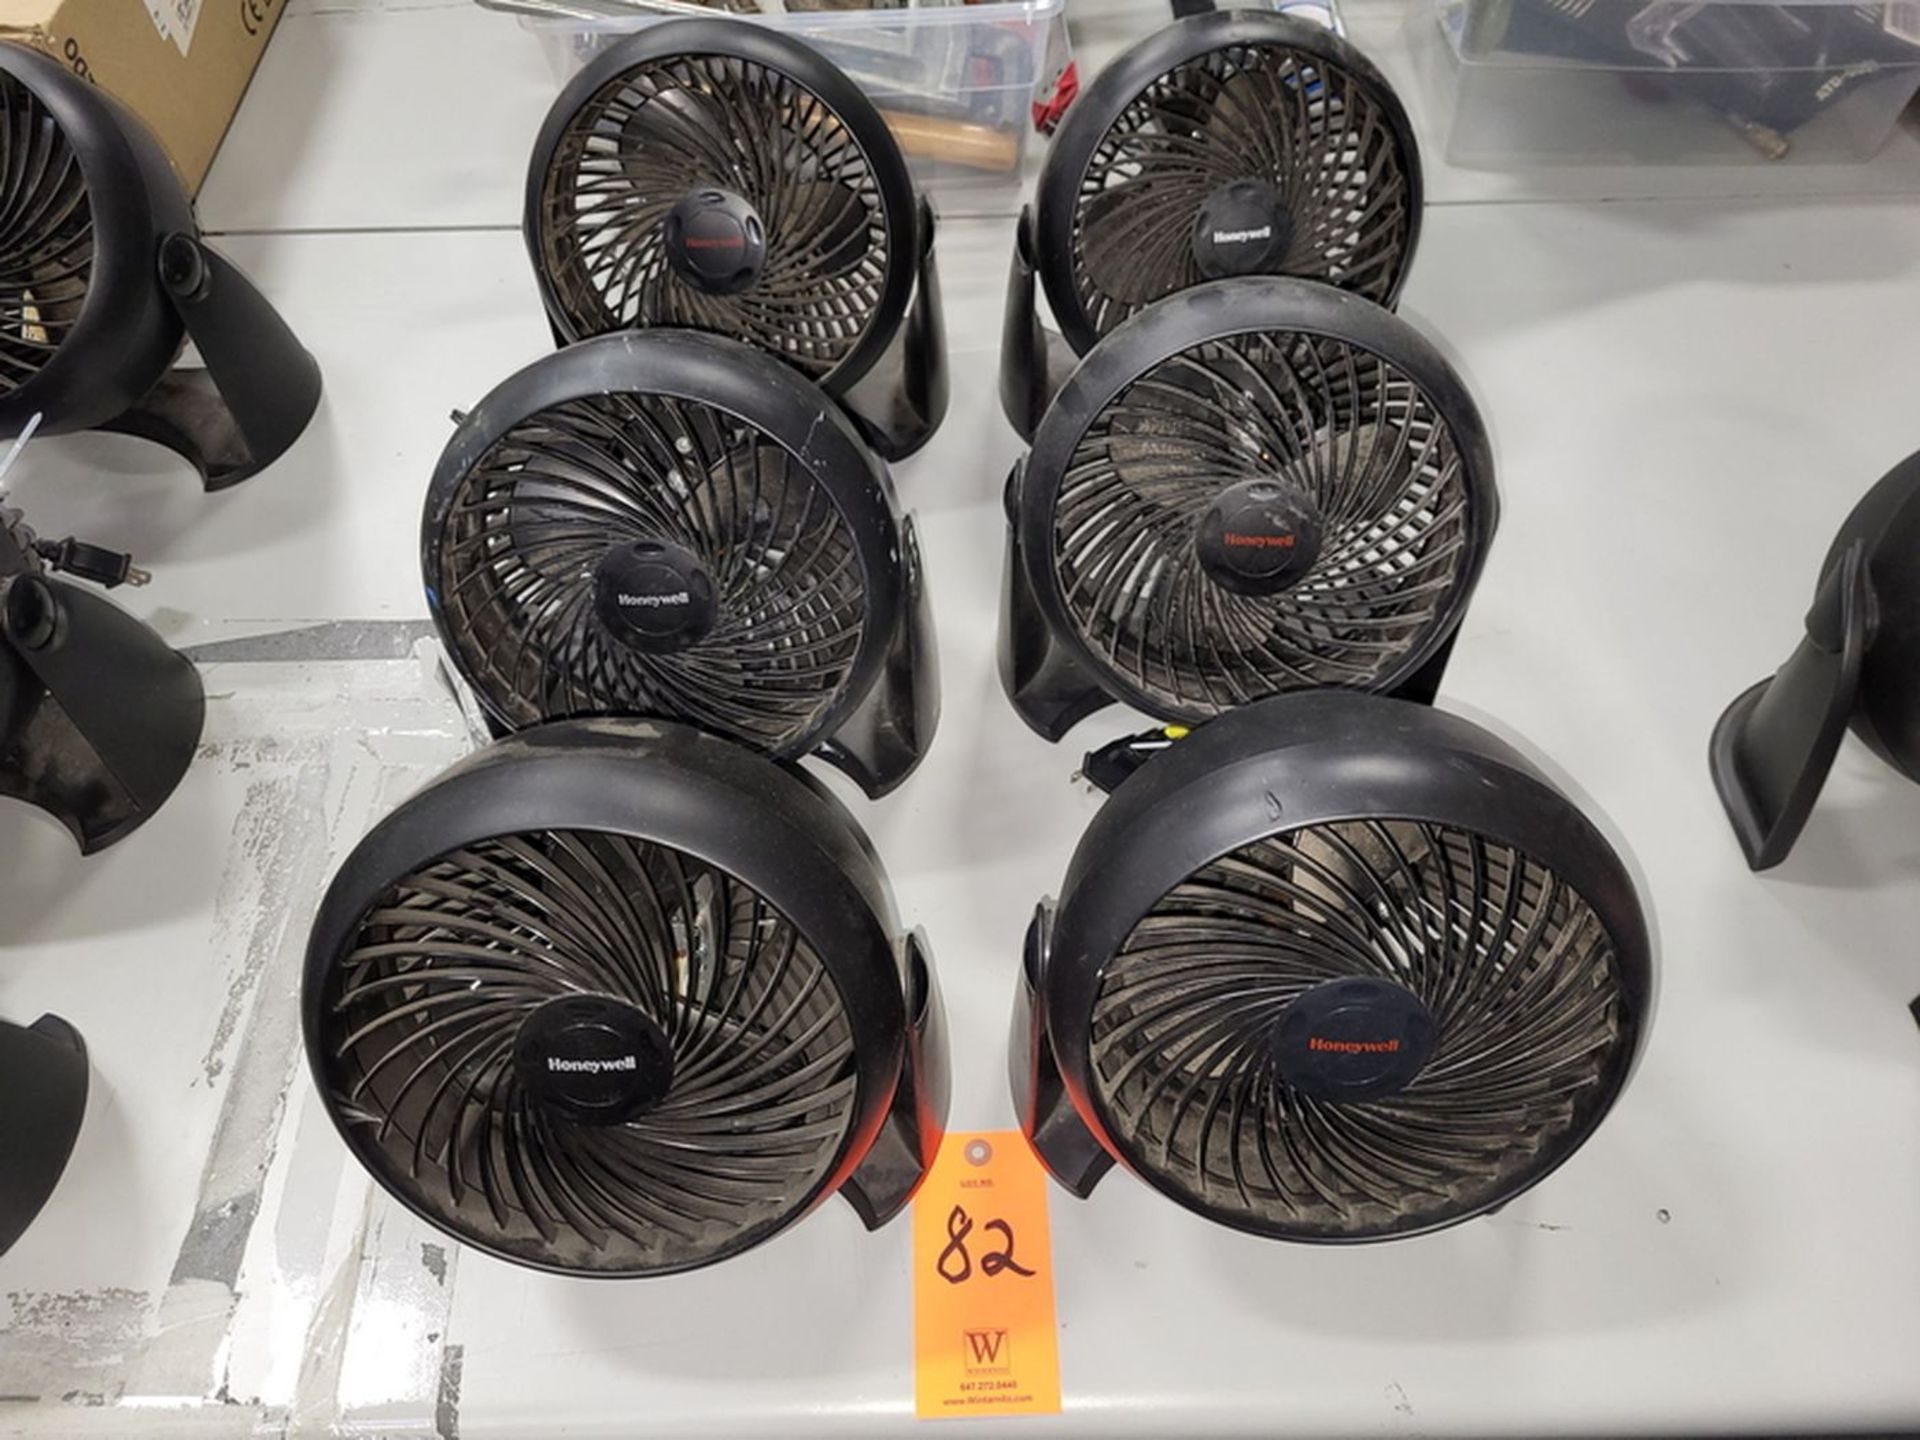 Lot - (6) Honeywell Electric Room Fans;